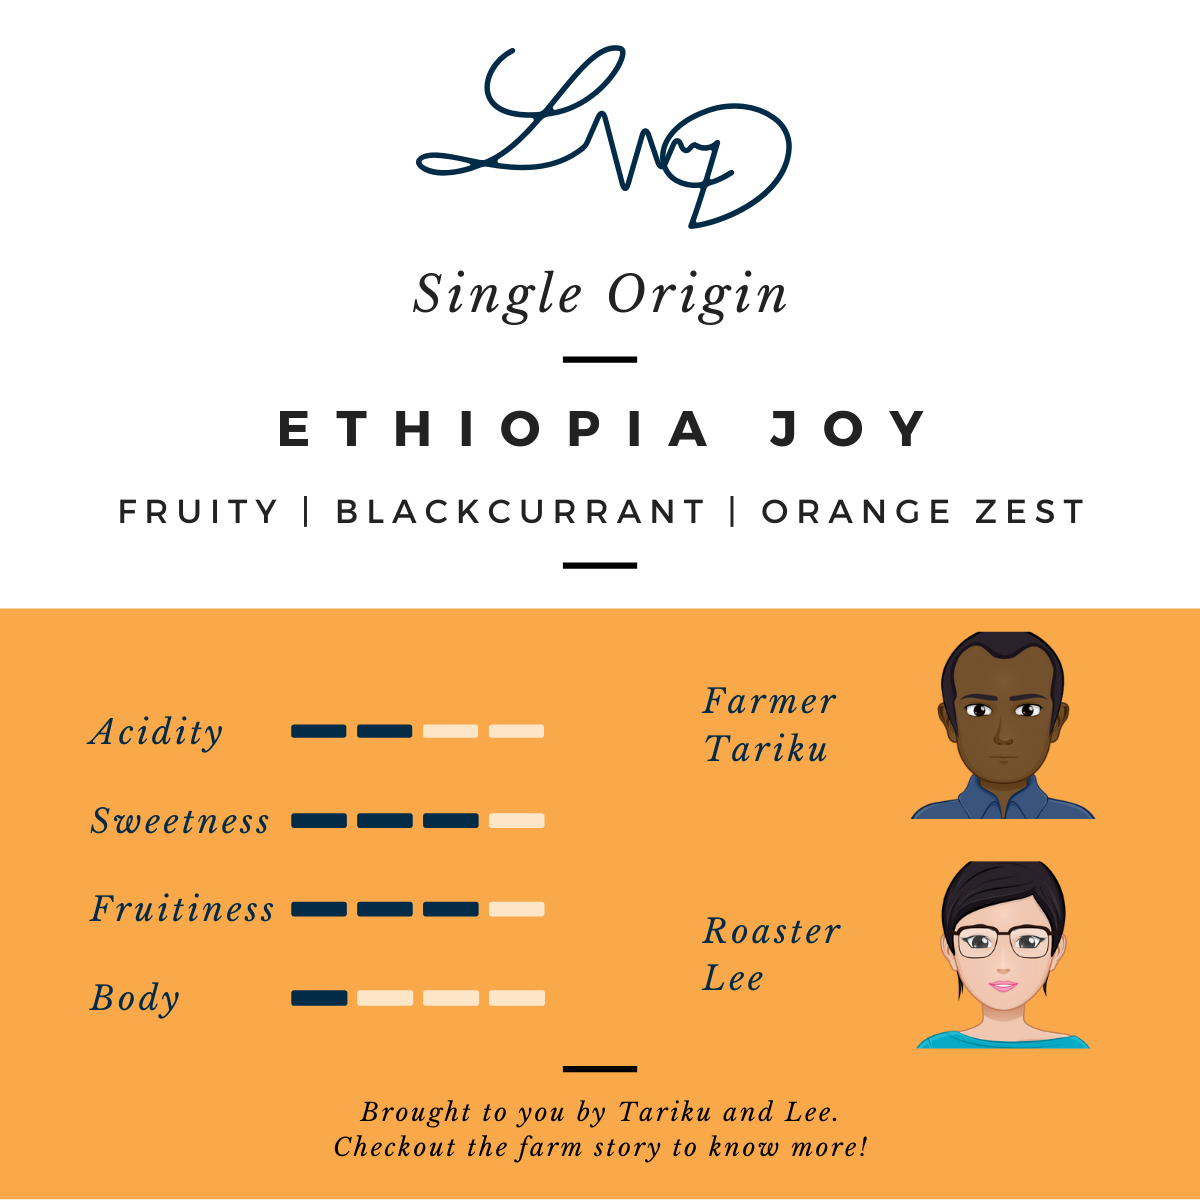 Freshly Roasted Ethiopia Specialty Coffee by LivDiff. Orange Zest, Berries and Blackcurrant flavour profile